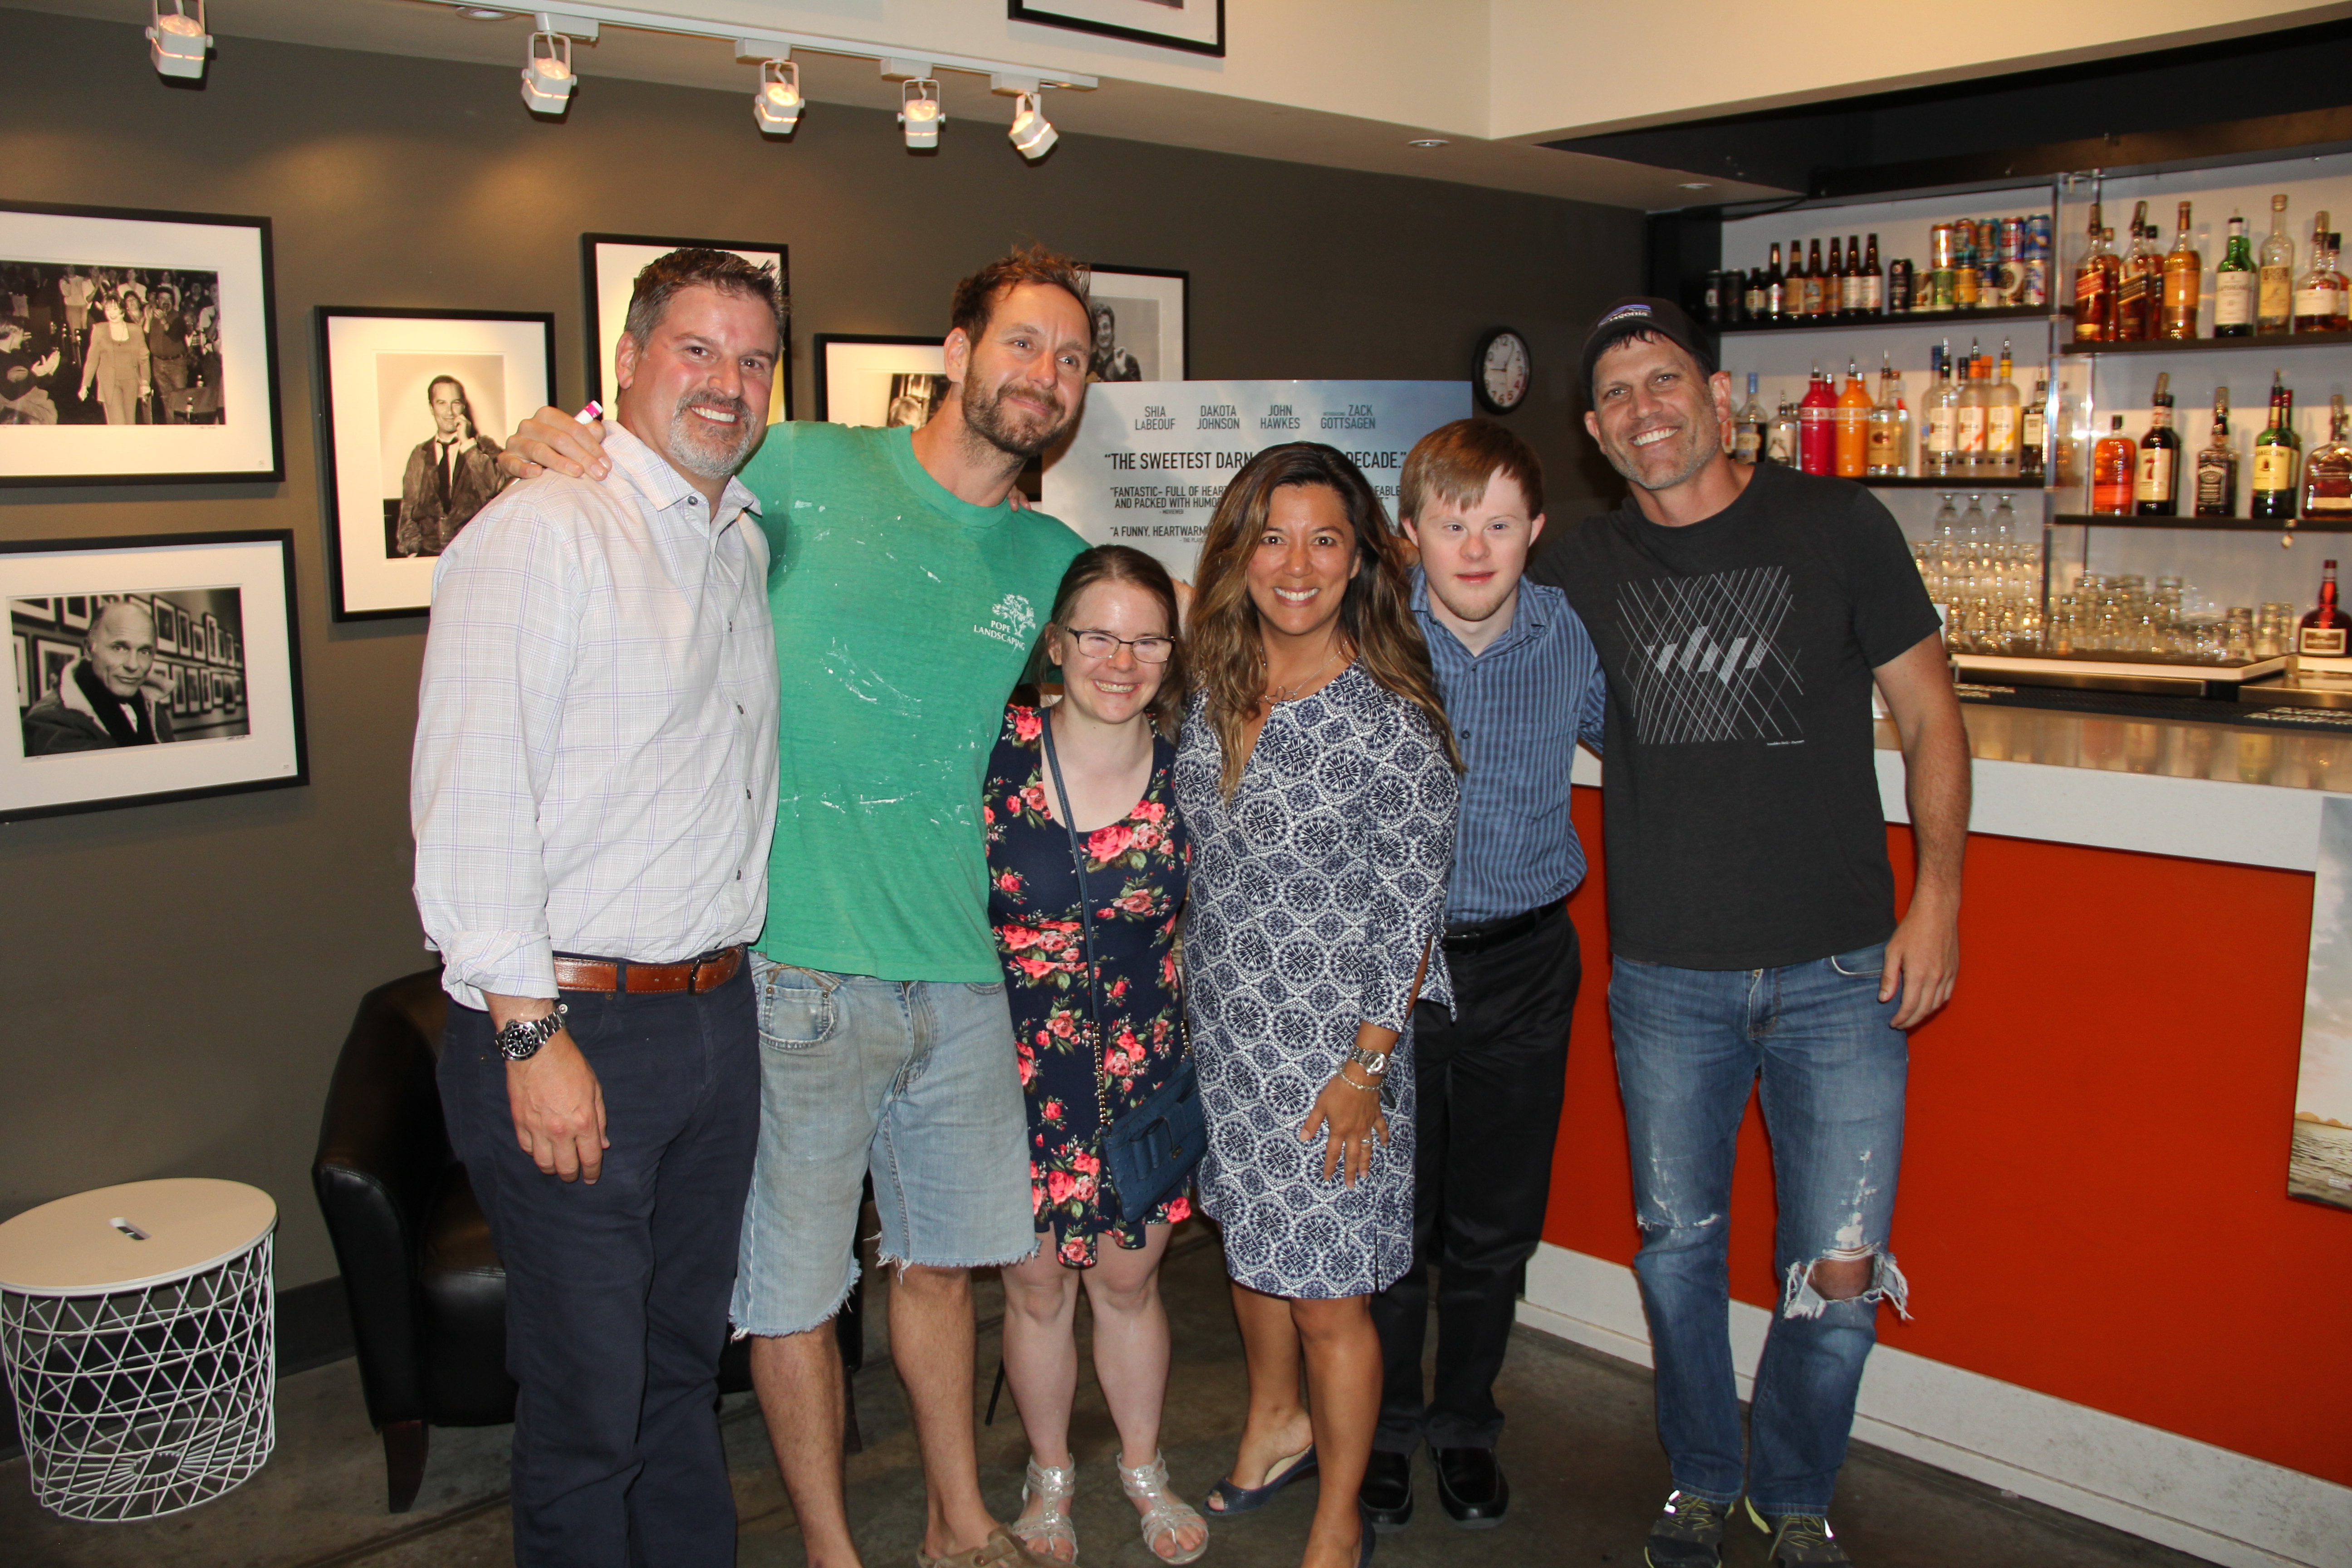 Global invites its members to a private screening of The Peanut Butter Falcon at the Sie Film Center. (L-R): Mac Macsovits, Tyler Nilson, Hanna Atkinson, Michelle Sie Whitten, Connor Long, and Michael Schwartz